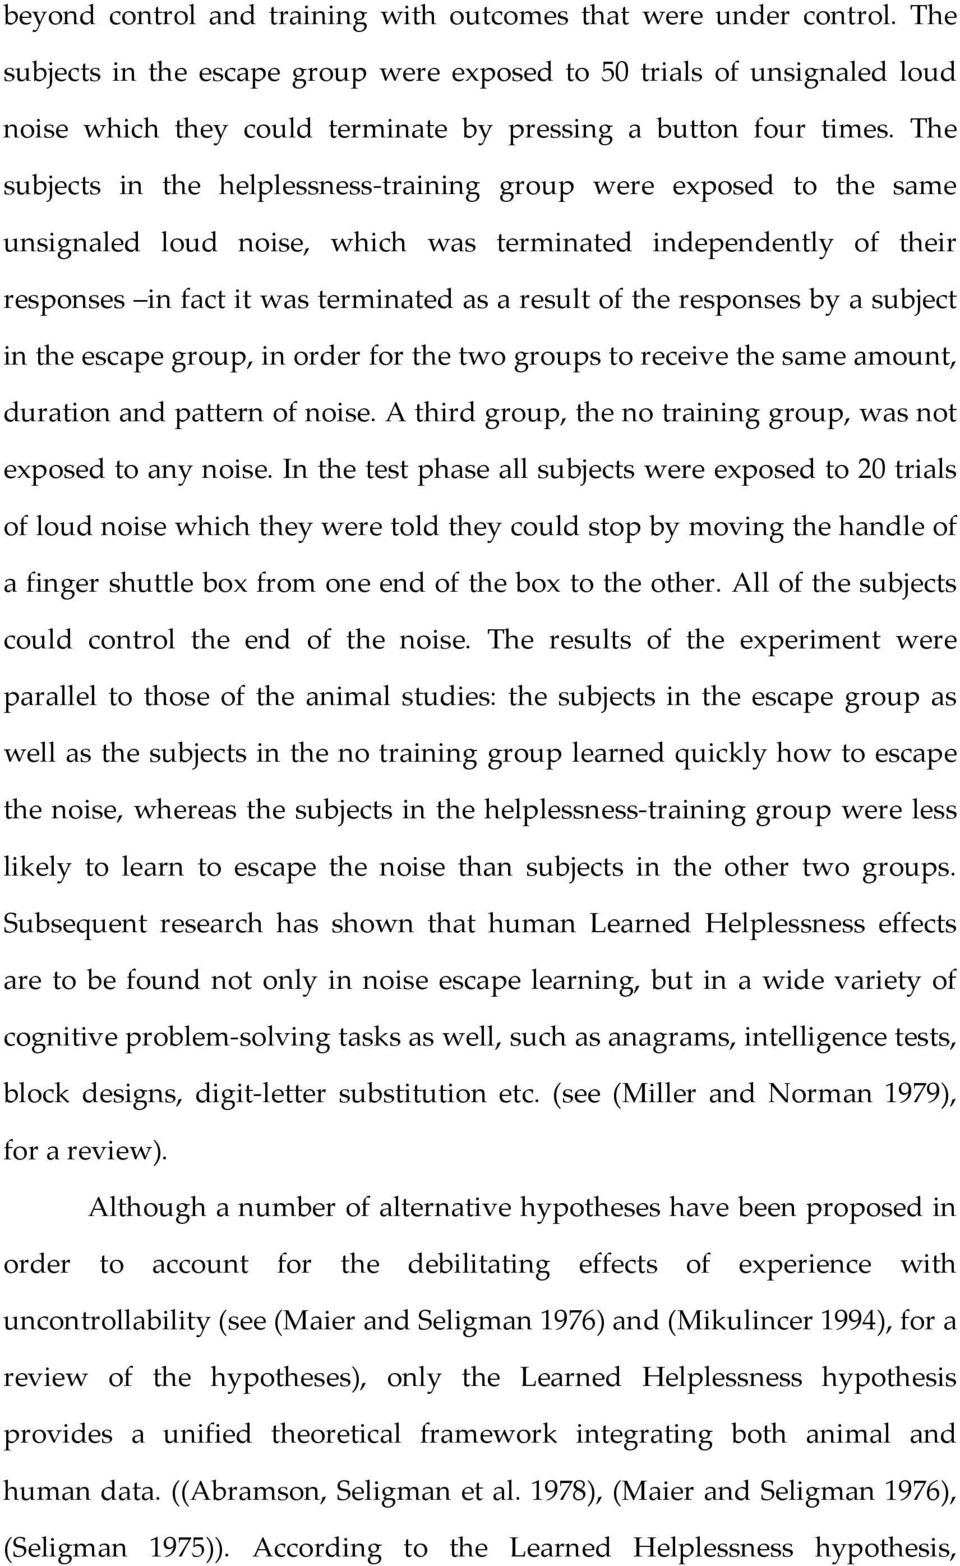 The subjects in the helplessness-training group were exposed to the same unsignaled loud noise, which was terminated independently of their responses in fact it was terminated as a result of the